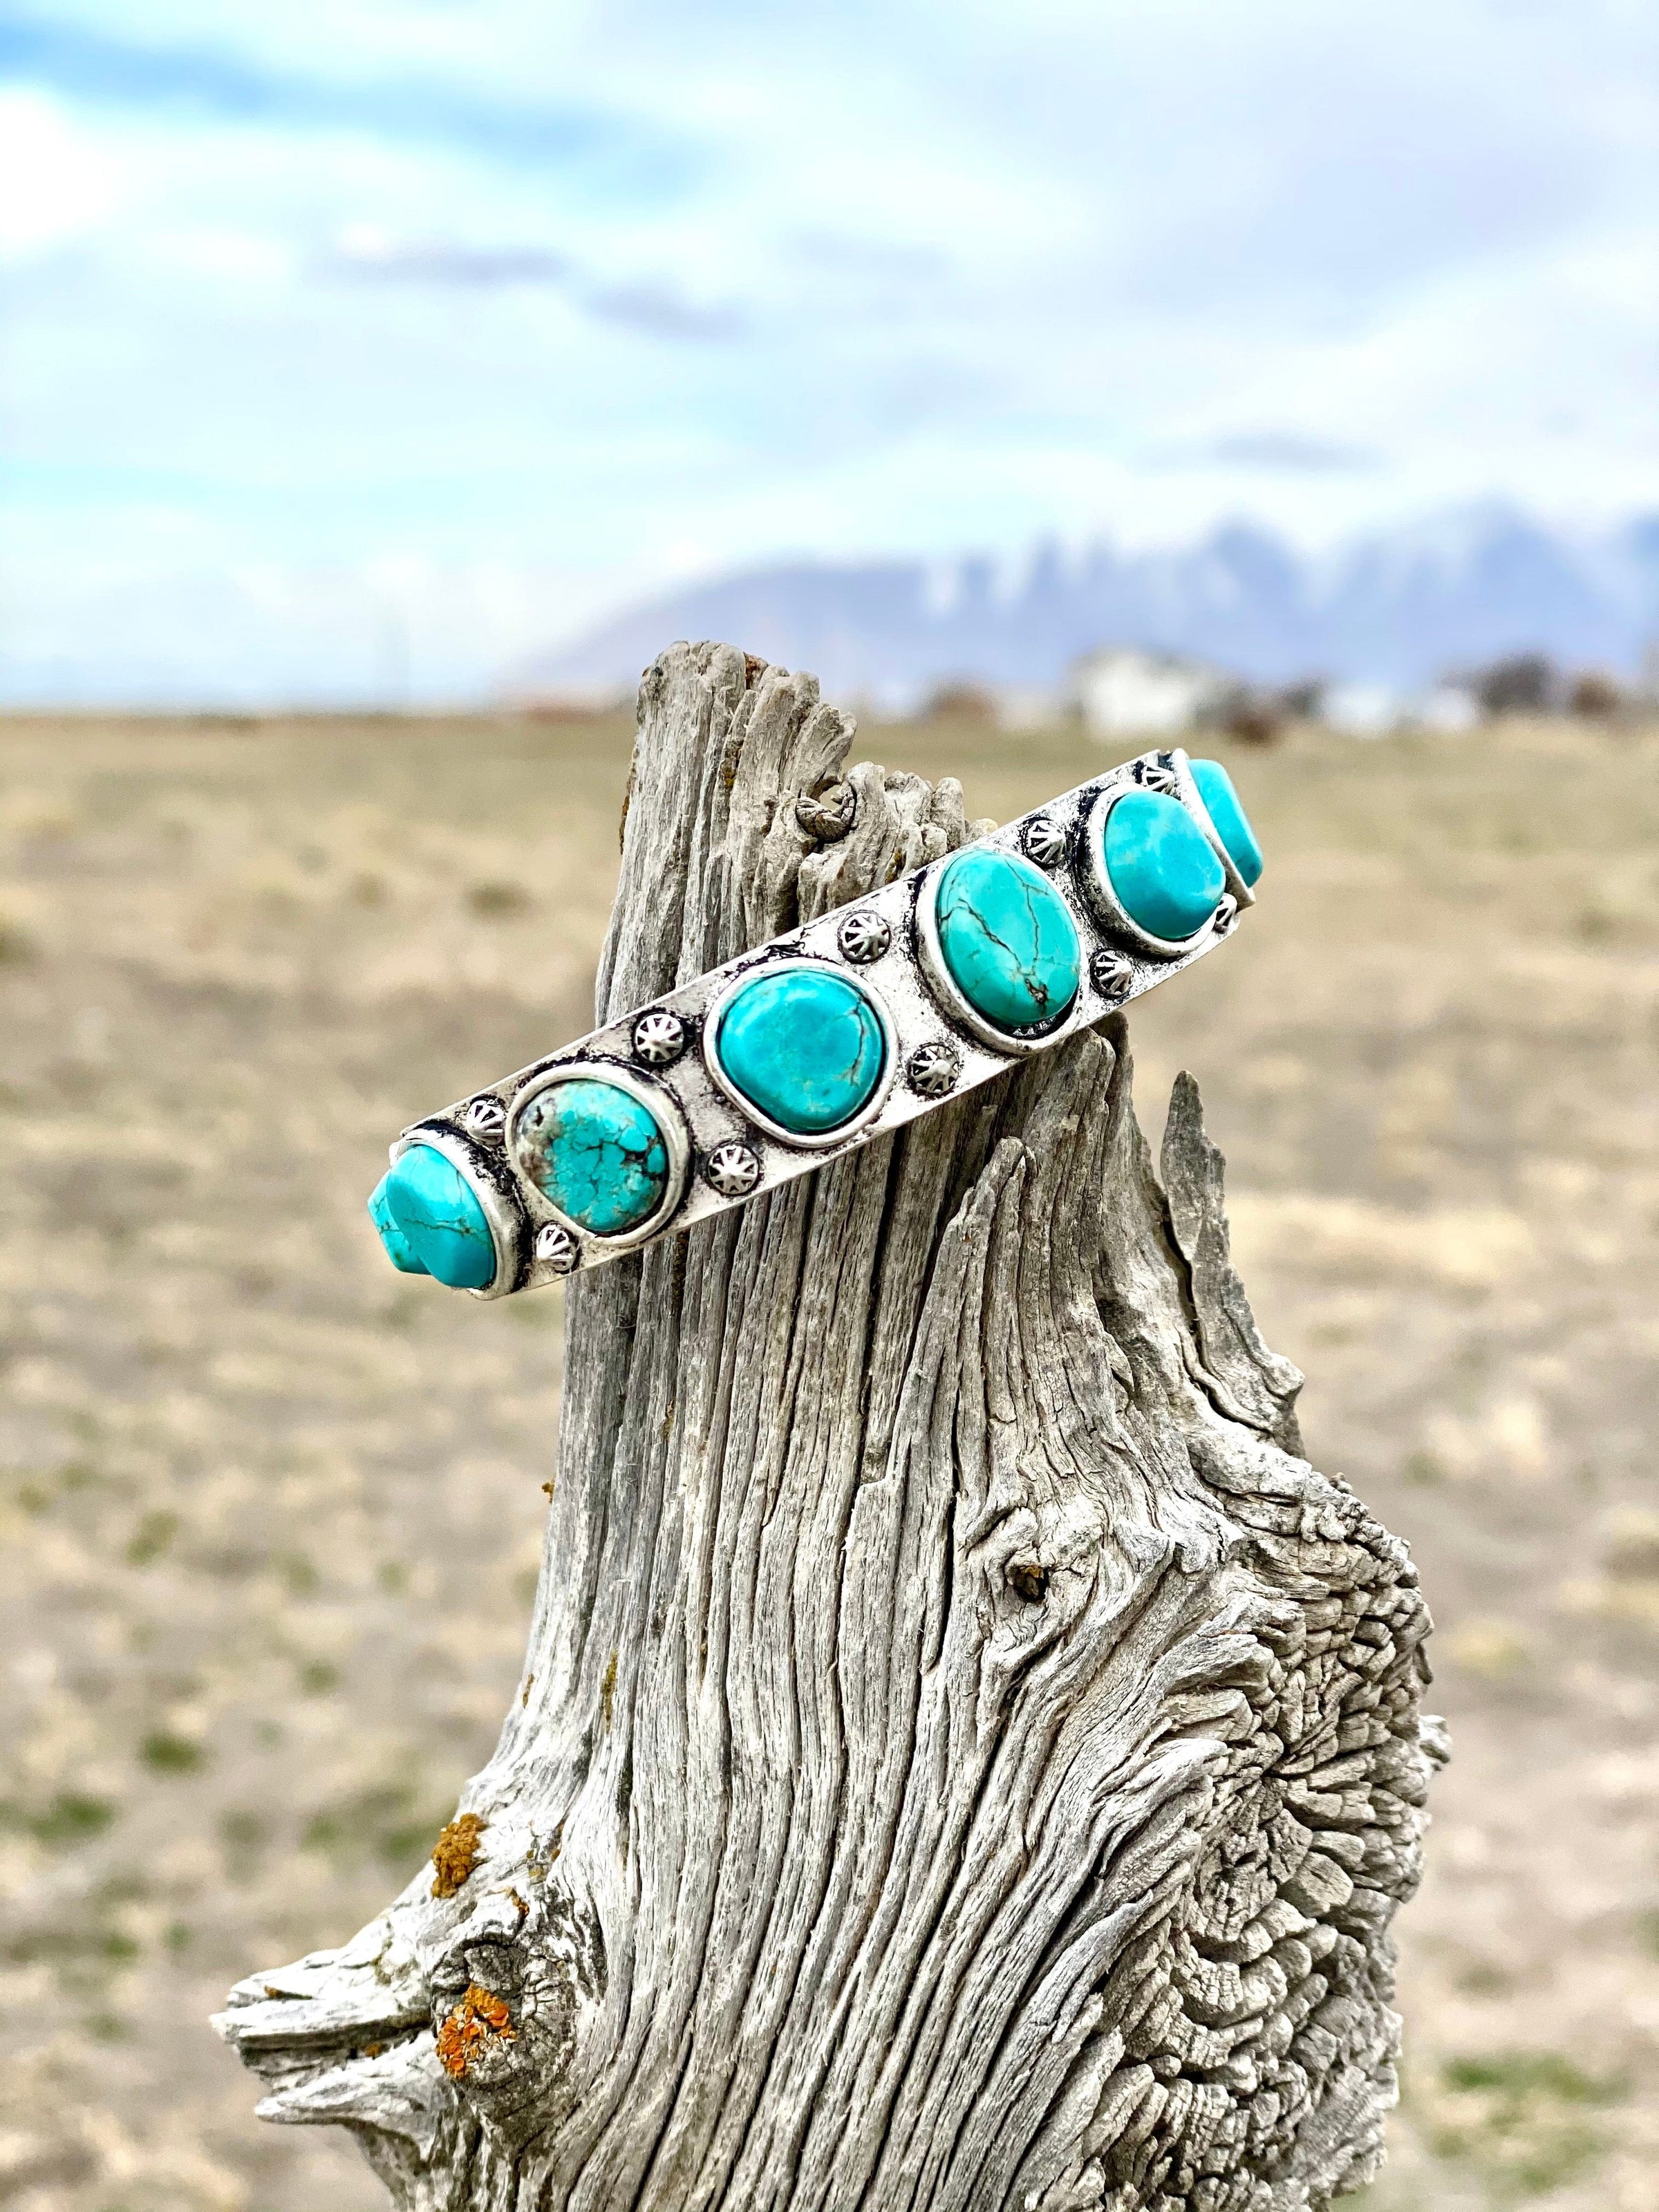 Georgian Jewelry | The Three Graces | Turquoise Makes the World Go